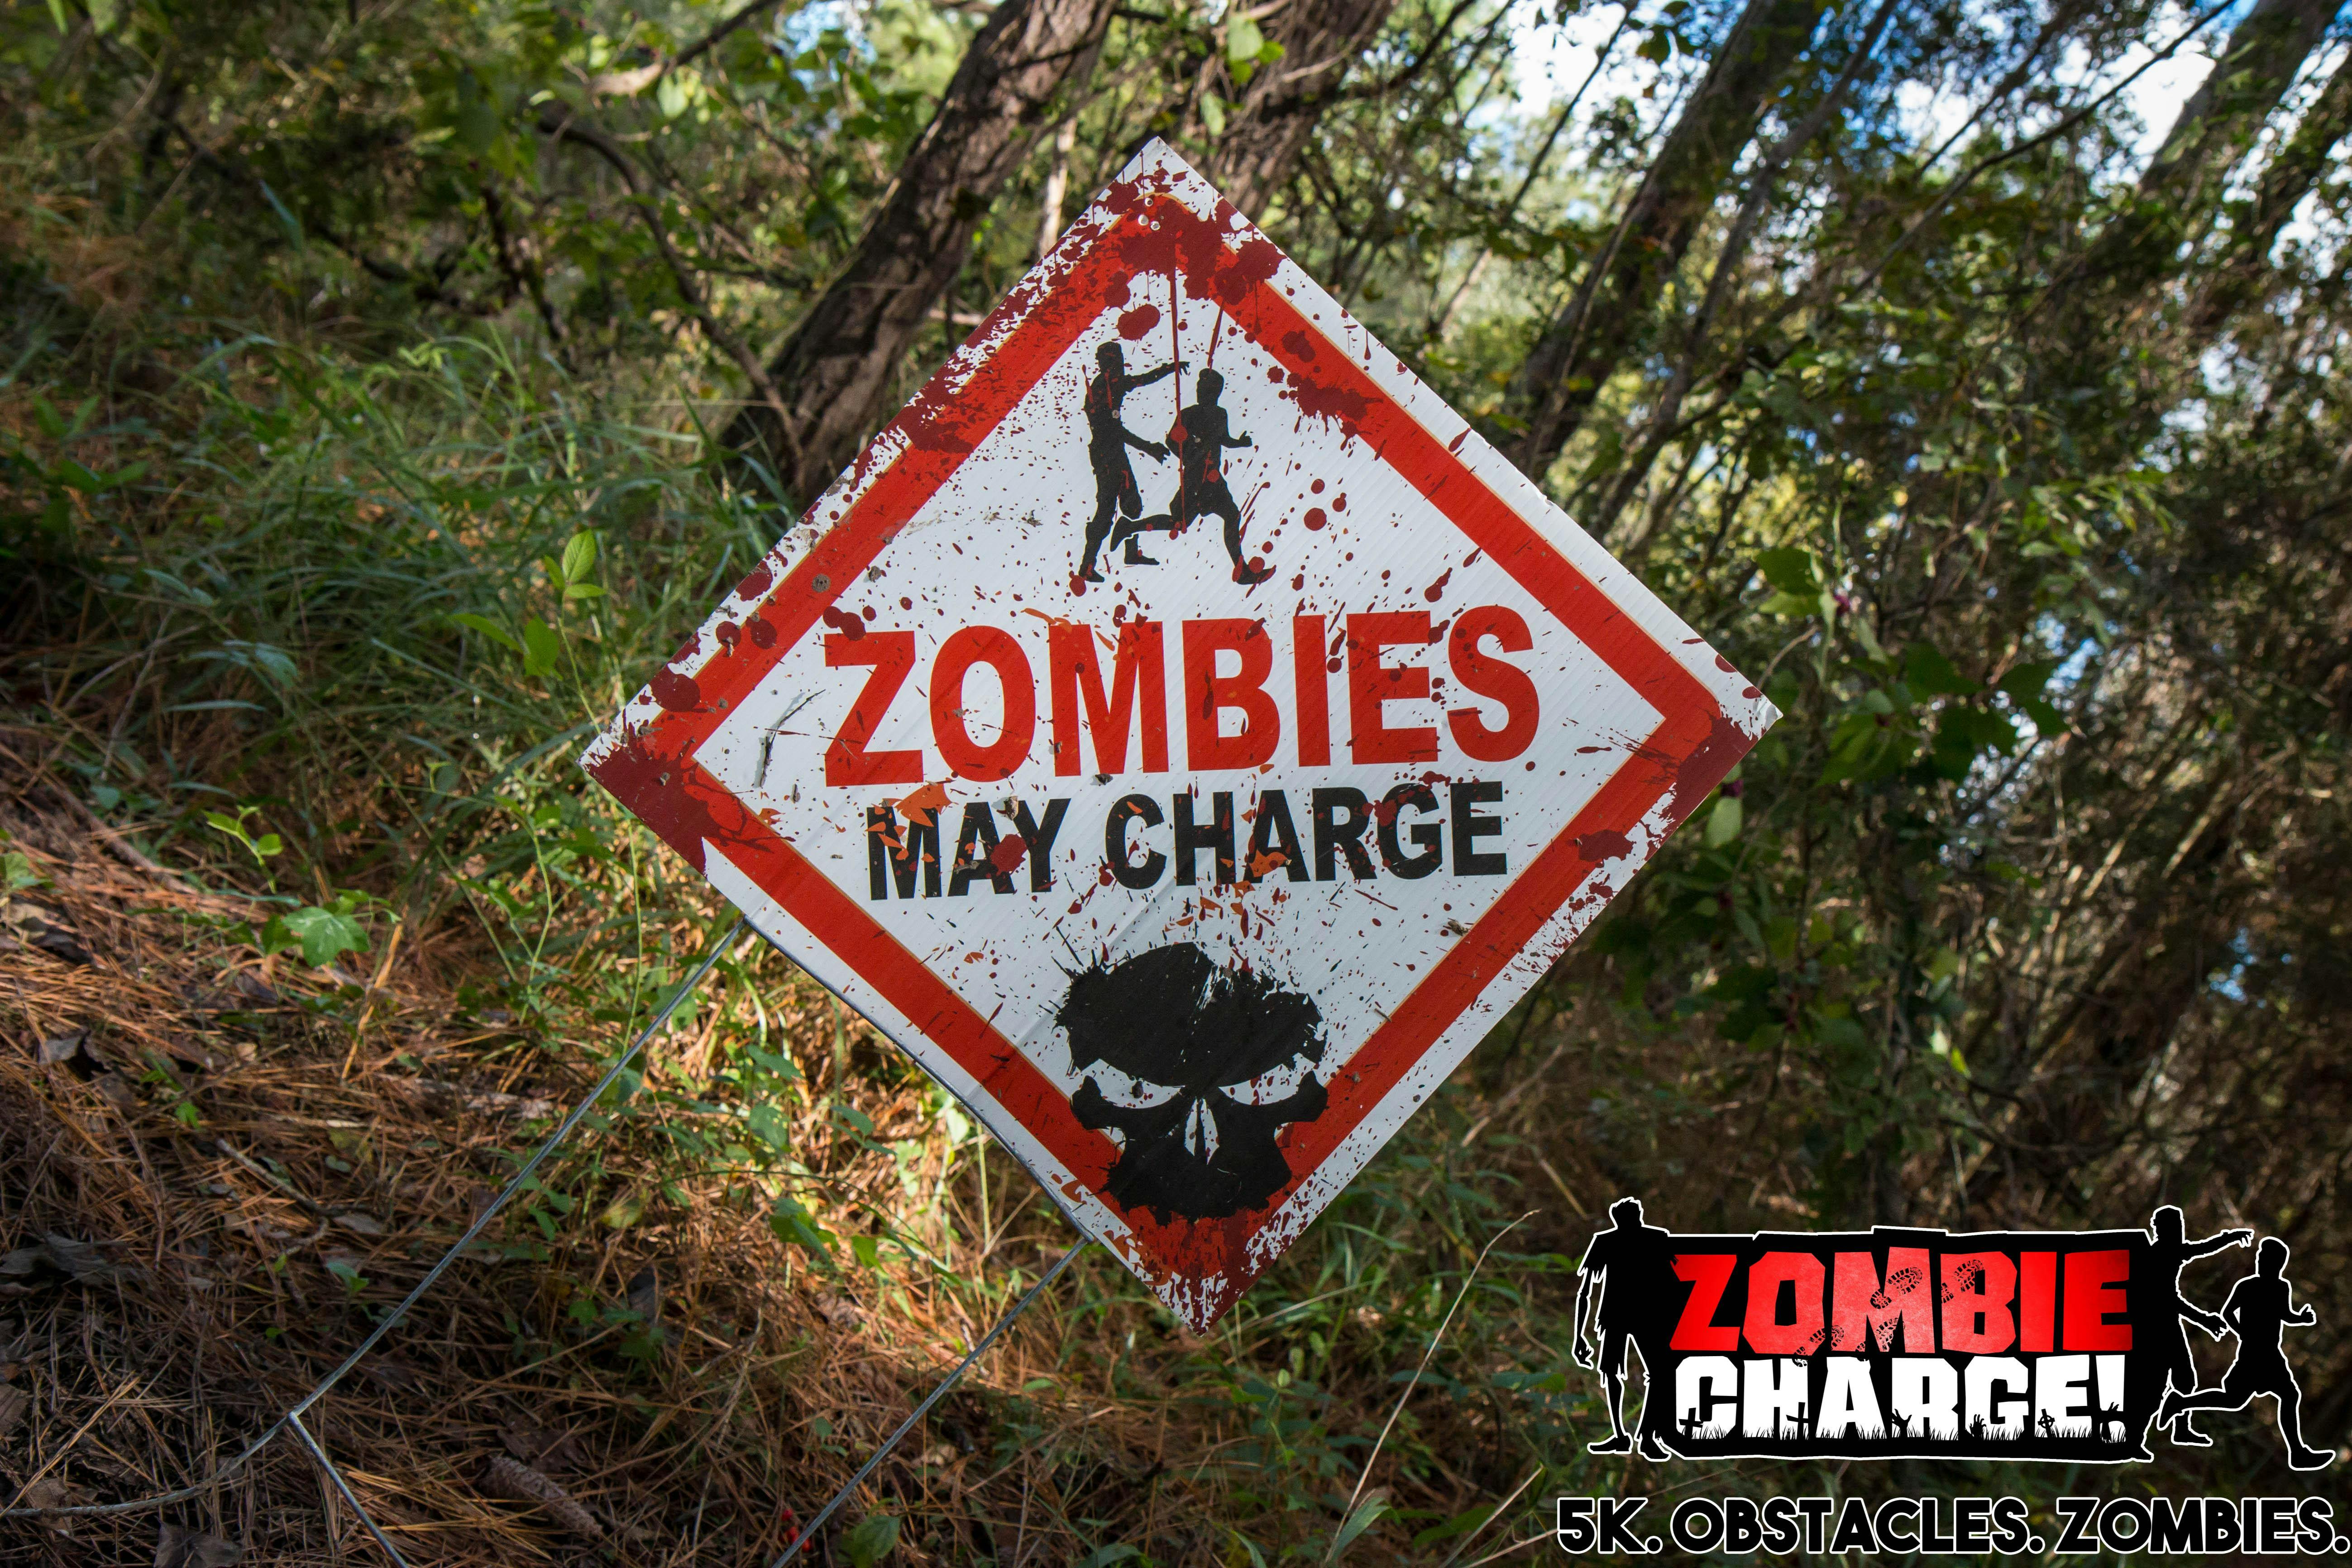 ZOMBIE CHARGE - AUSTIN - SEPTEMBER 21, 2019